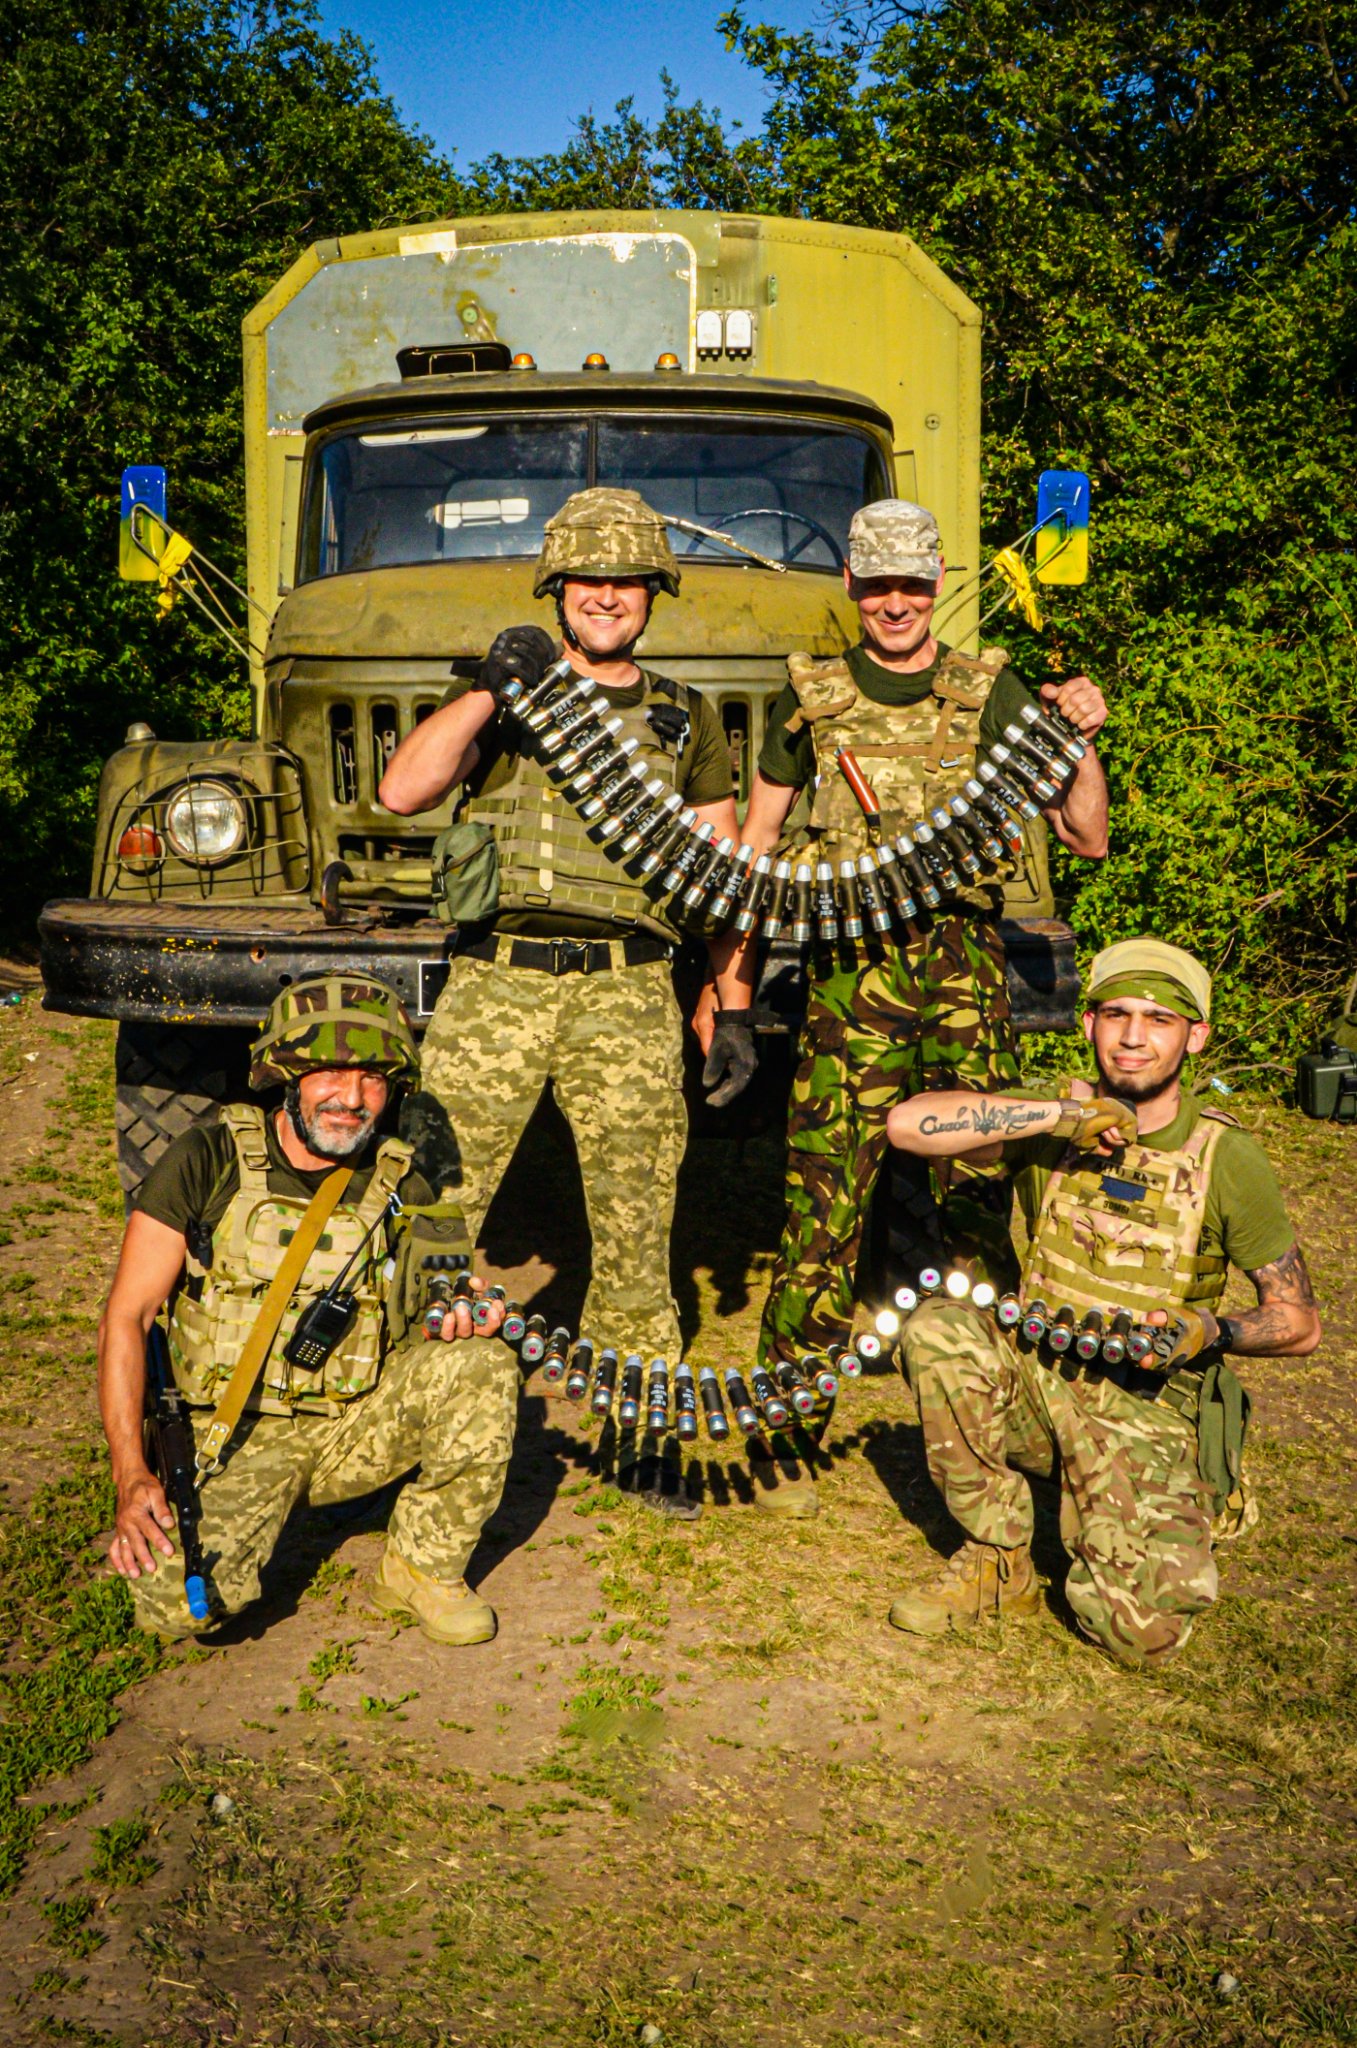 VOG-17M grenades / Ukrainian Armed Forces / Ukrainian Territorial Defense Now Equipped With AGS-17 Automatic Grenade Launchers